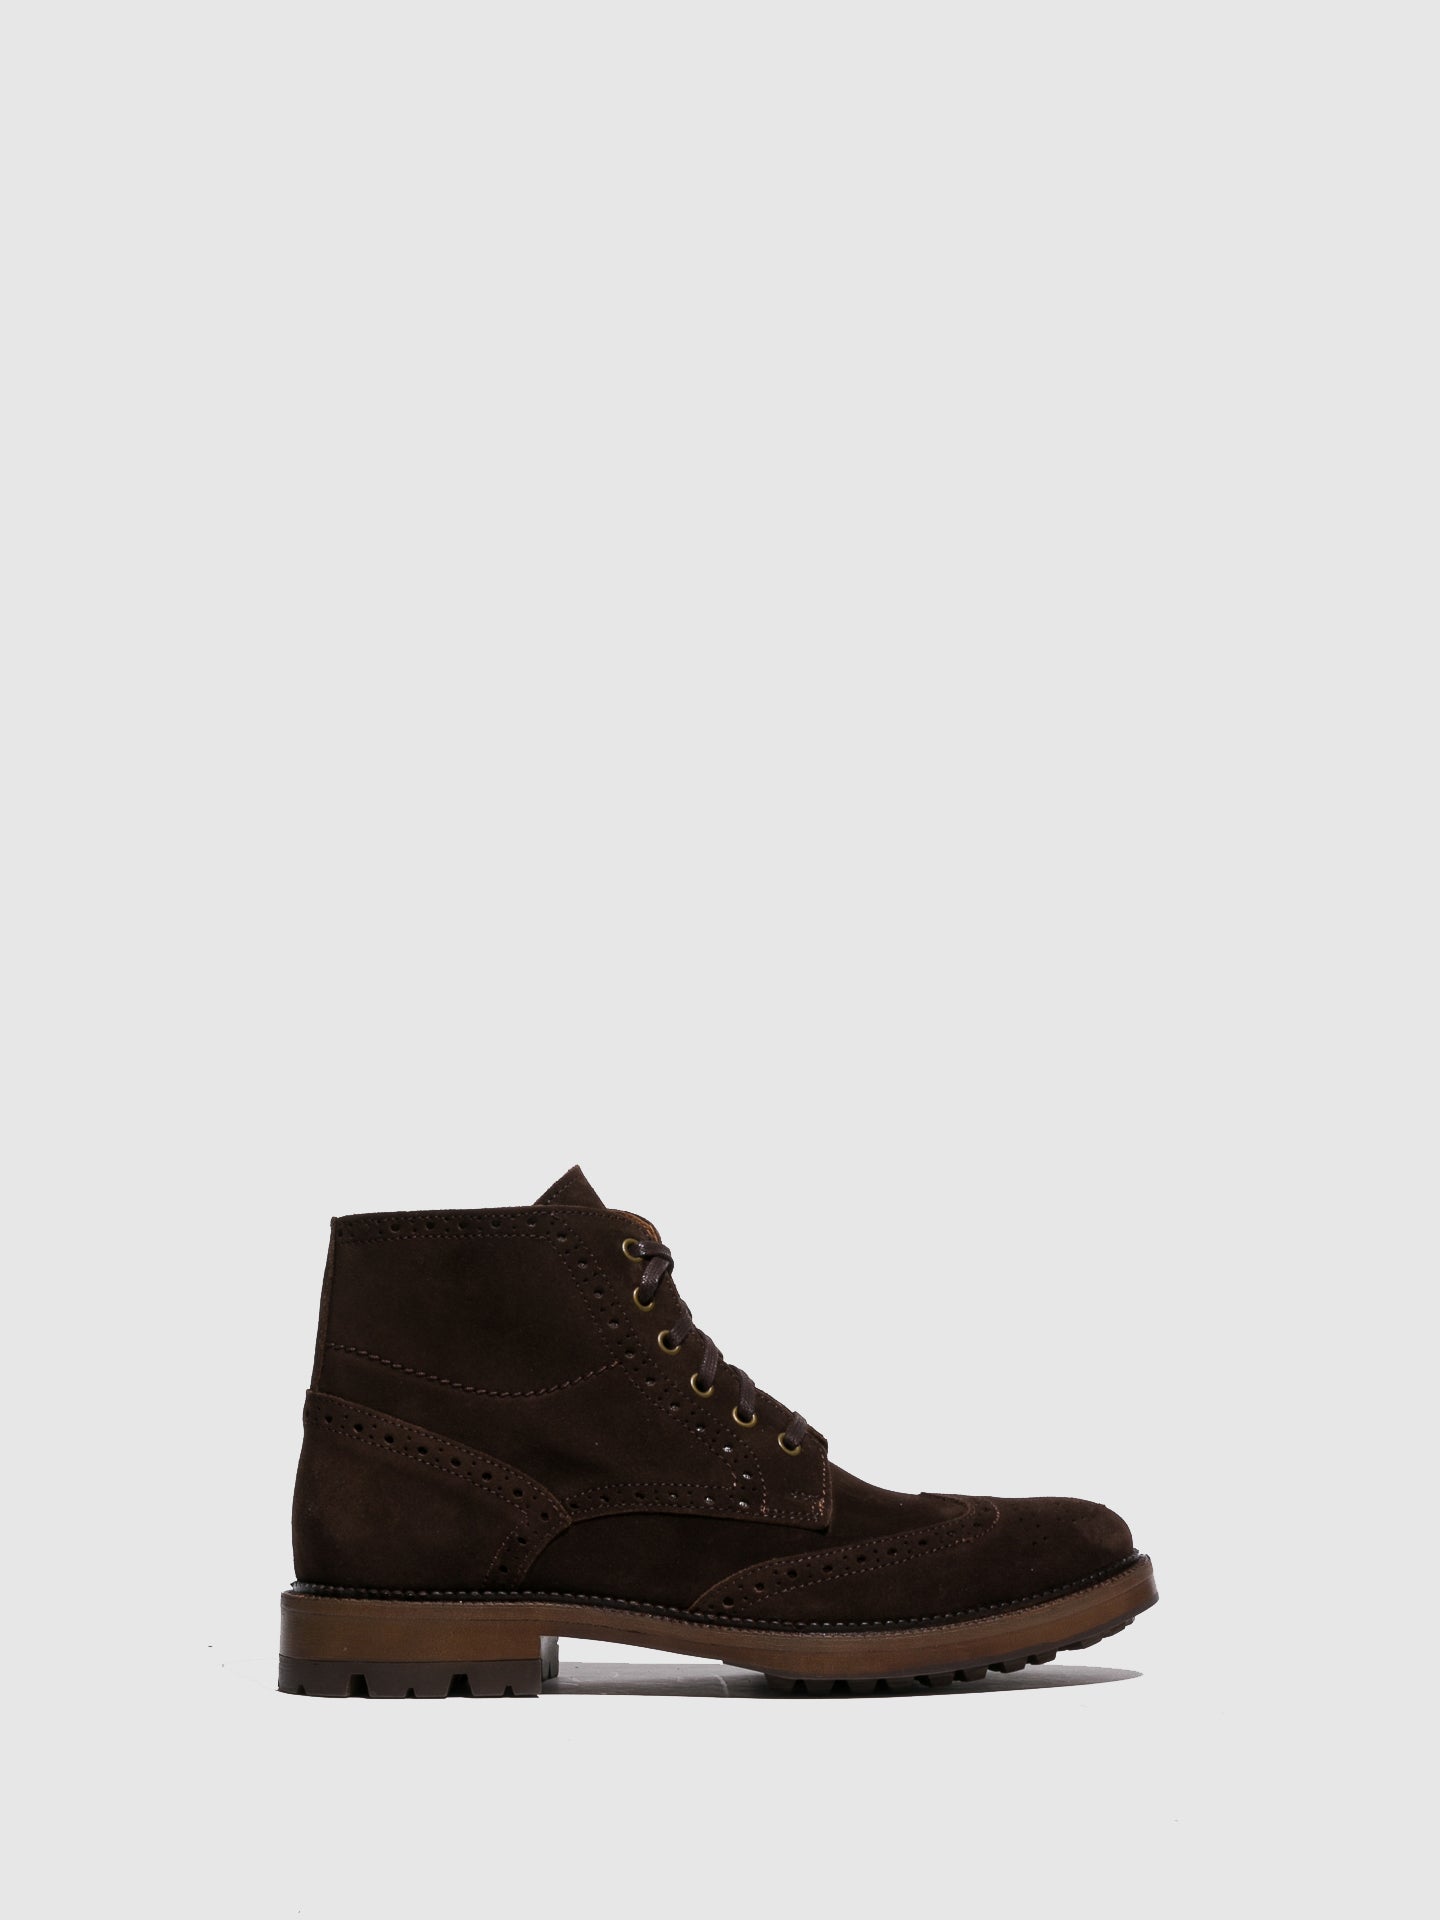 Foreva Brown Lace-up Boots